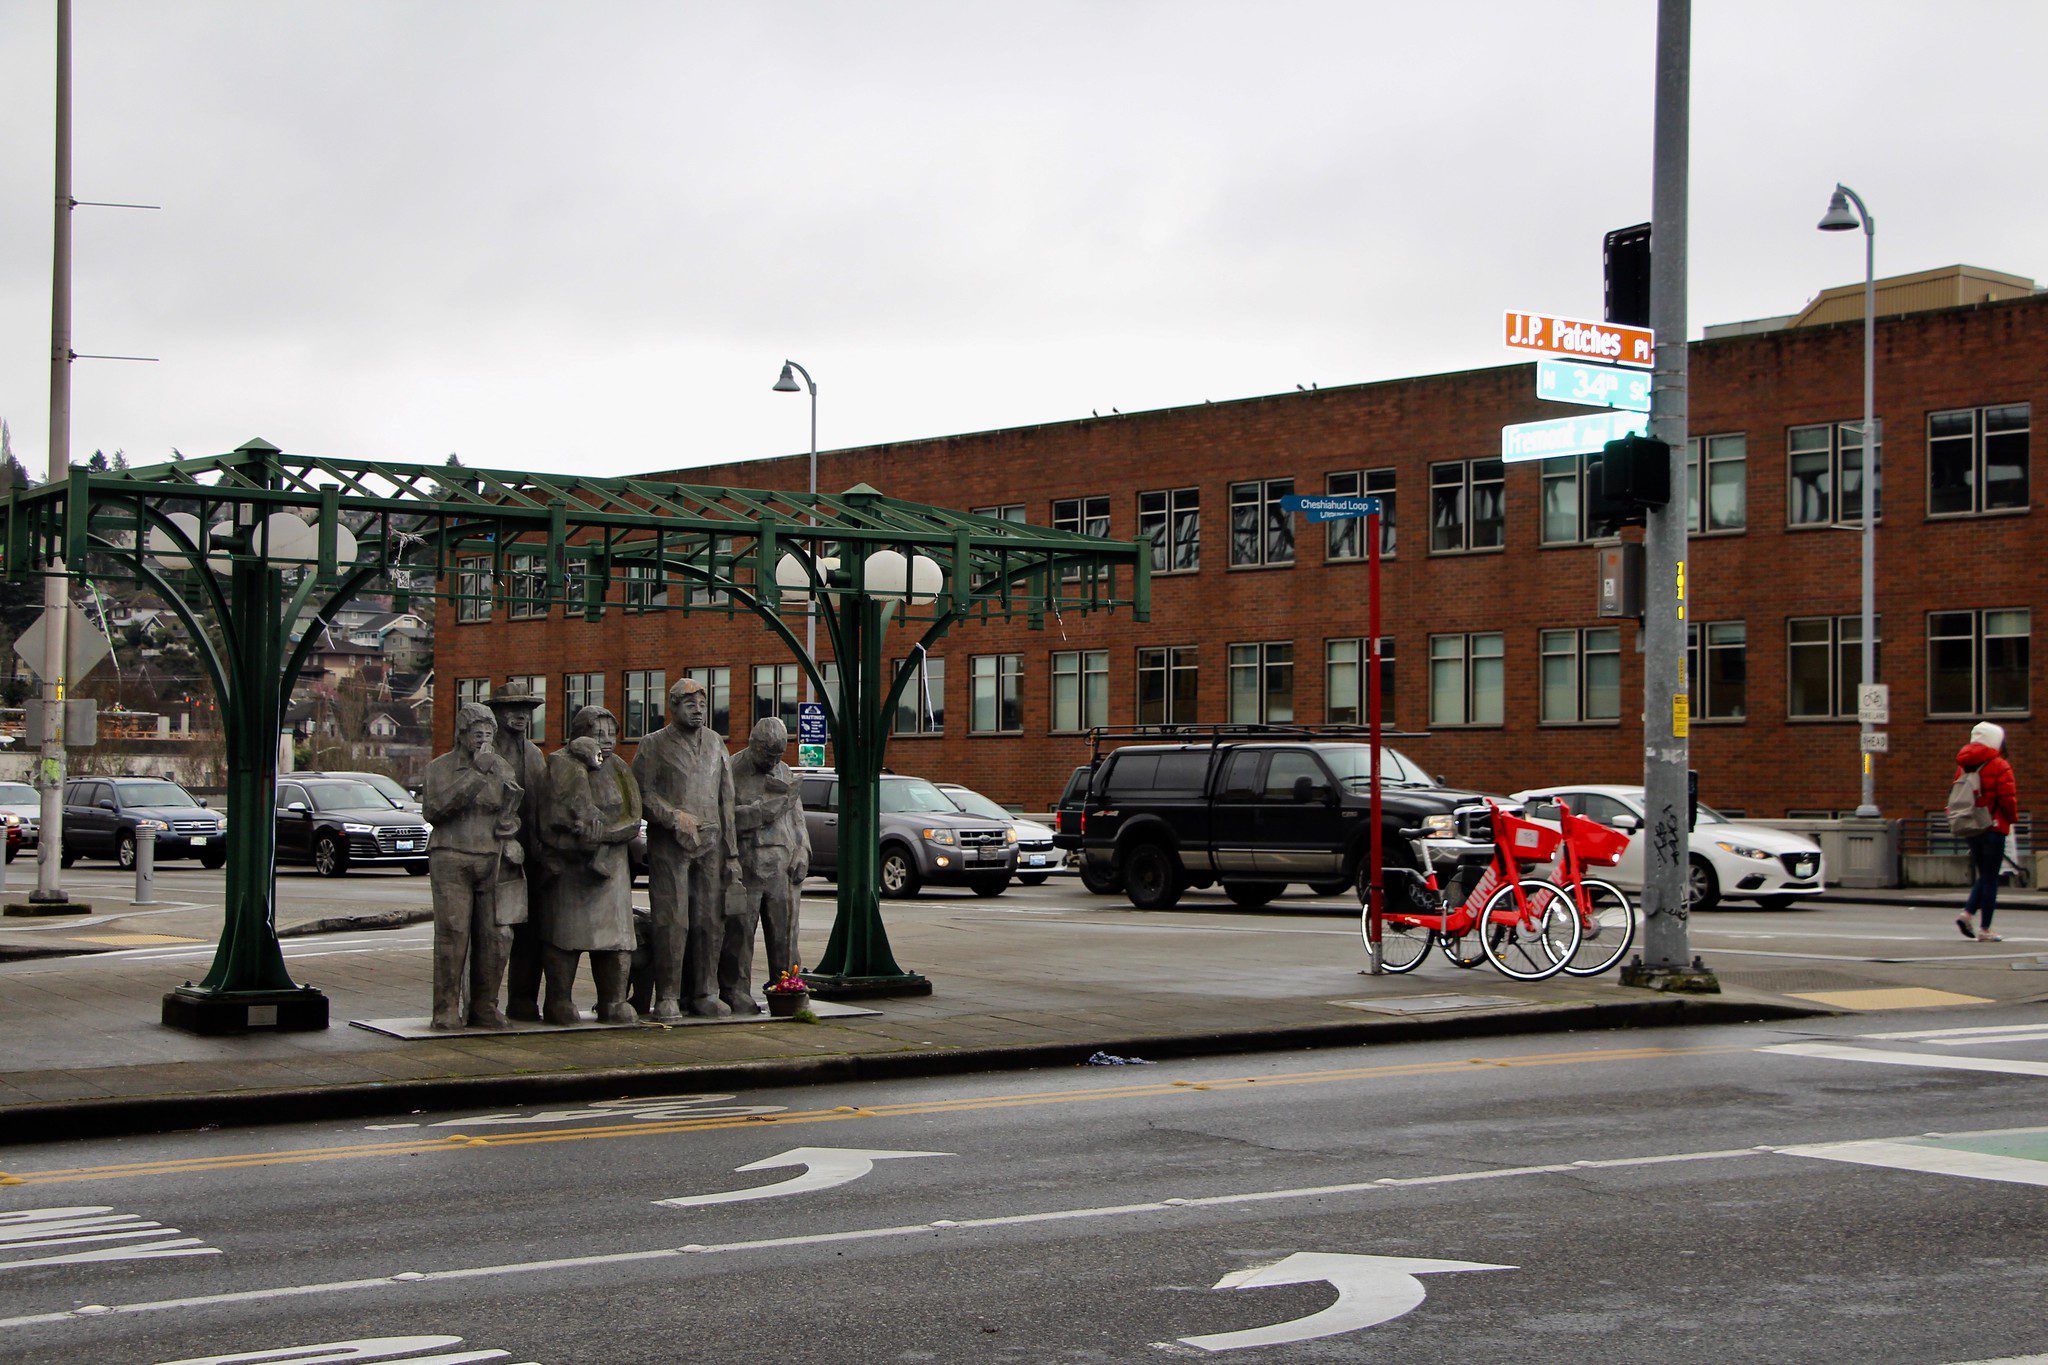 The iconic Waiting for the Interurban statue in Fremont, with drivers along Fremont Ave N waiting for the light to turn green. A large brick building is located in the background, along with two red rideshare bicycles.